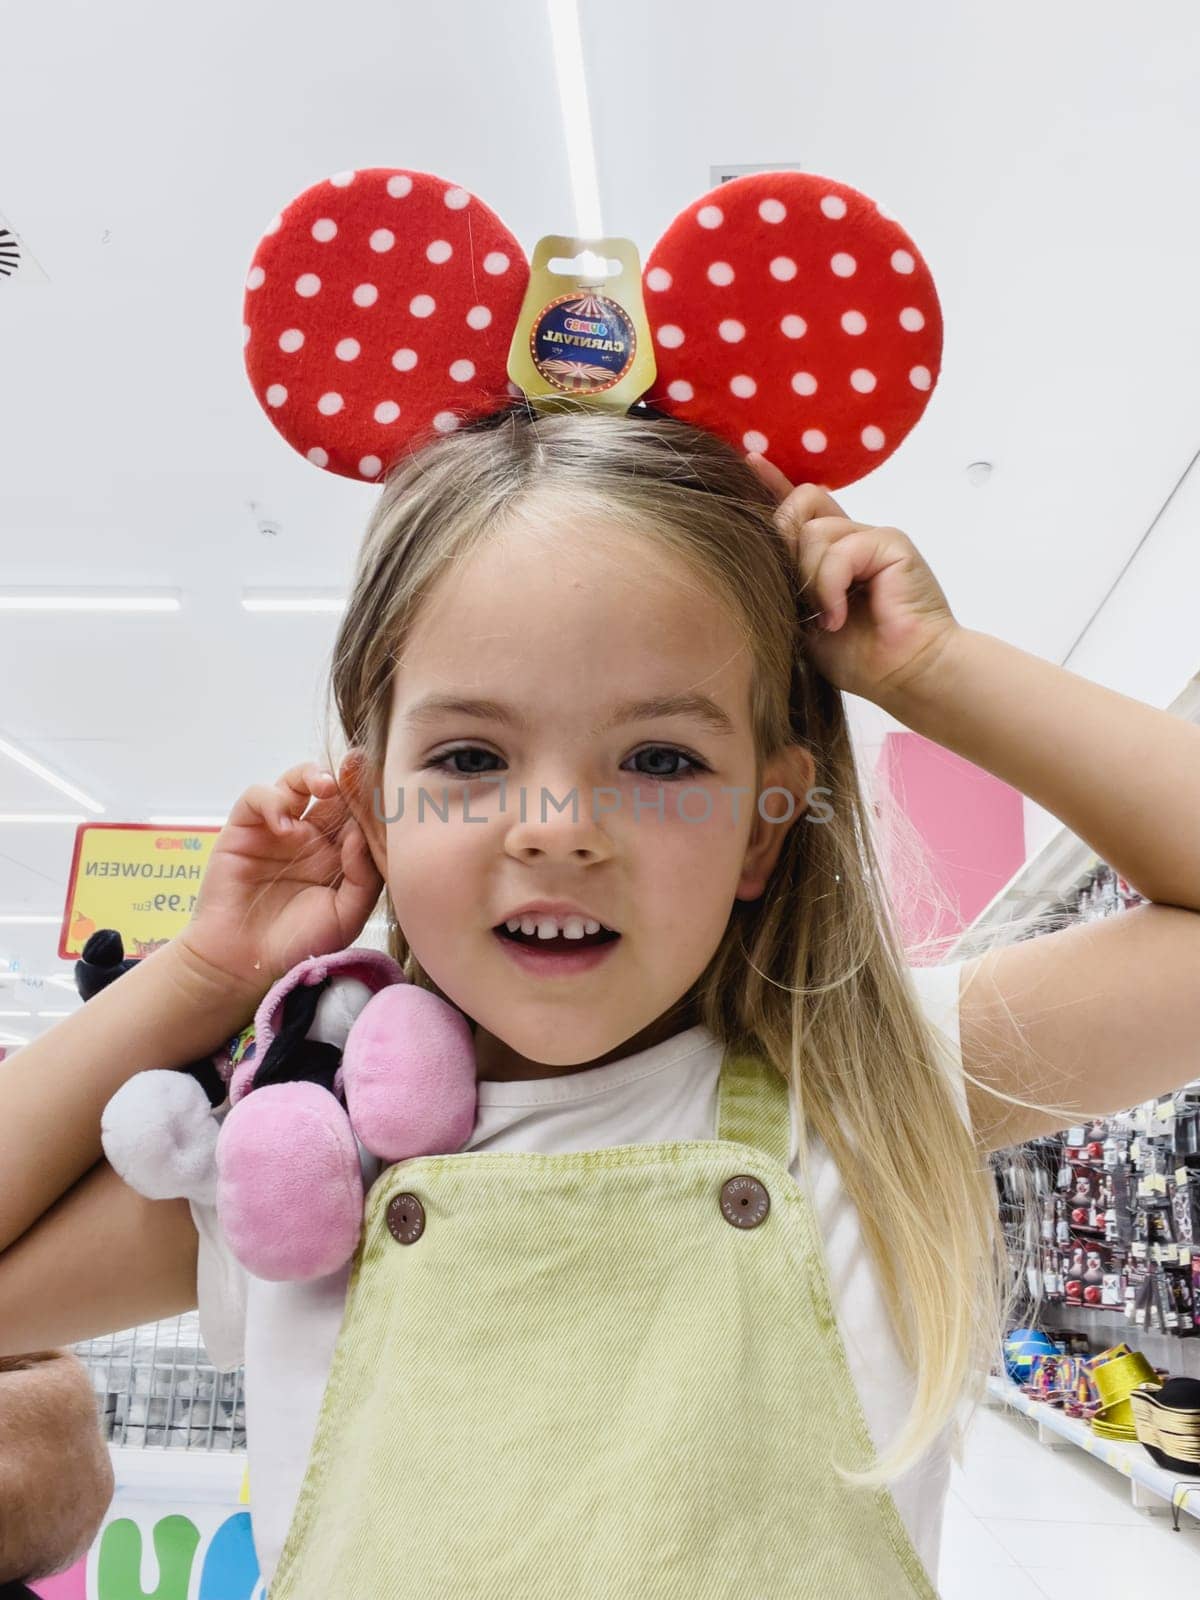 Little girl in the store trying on cute red polka dot Minnie Mouse ears by Nadtochiy